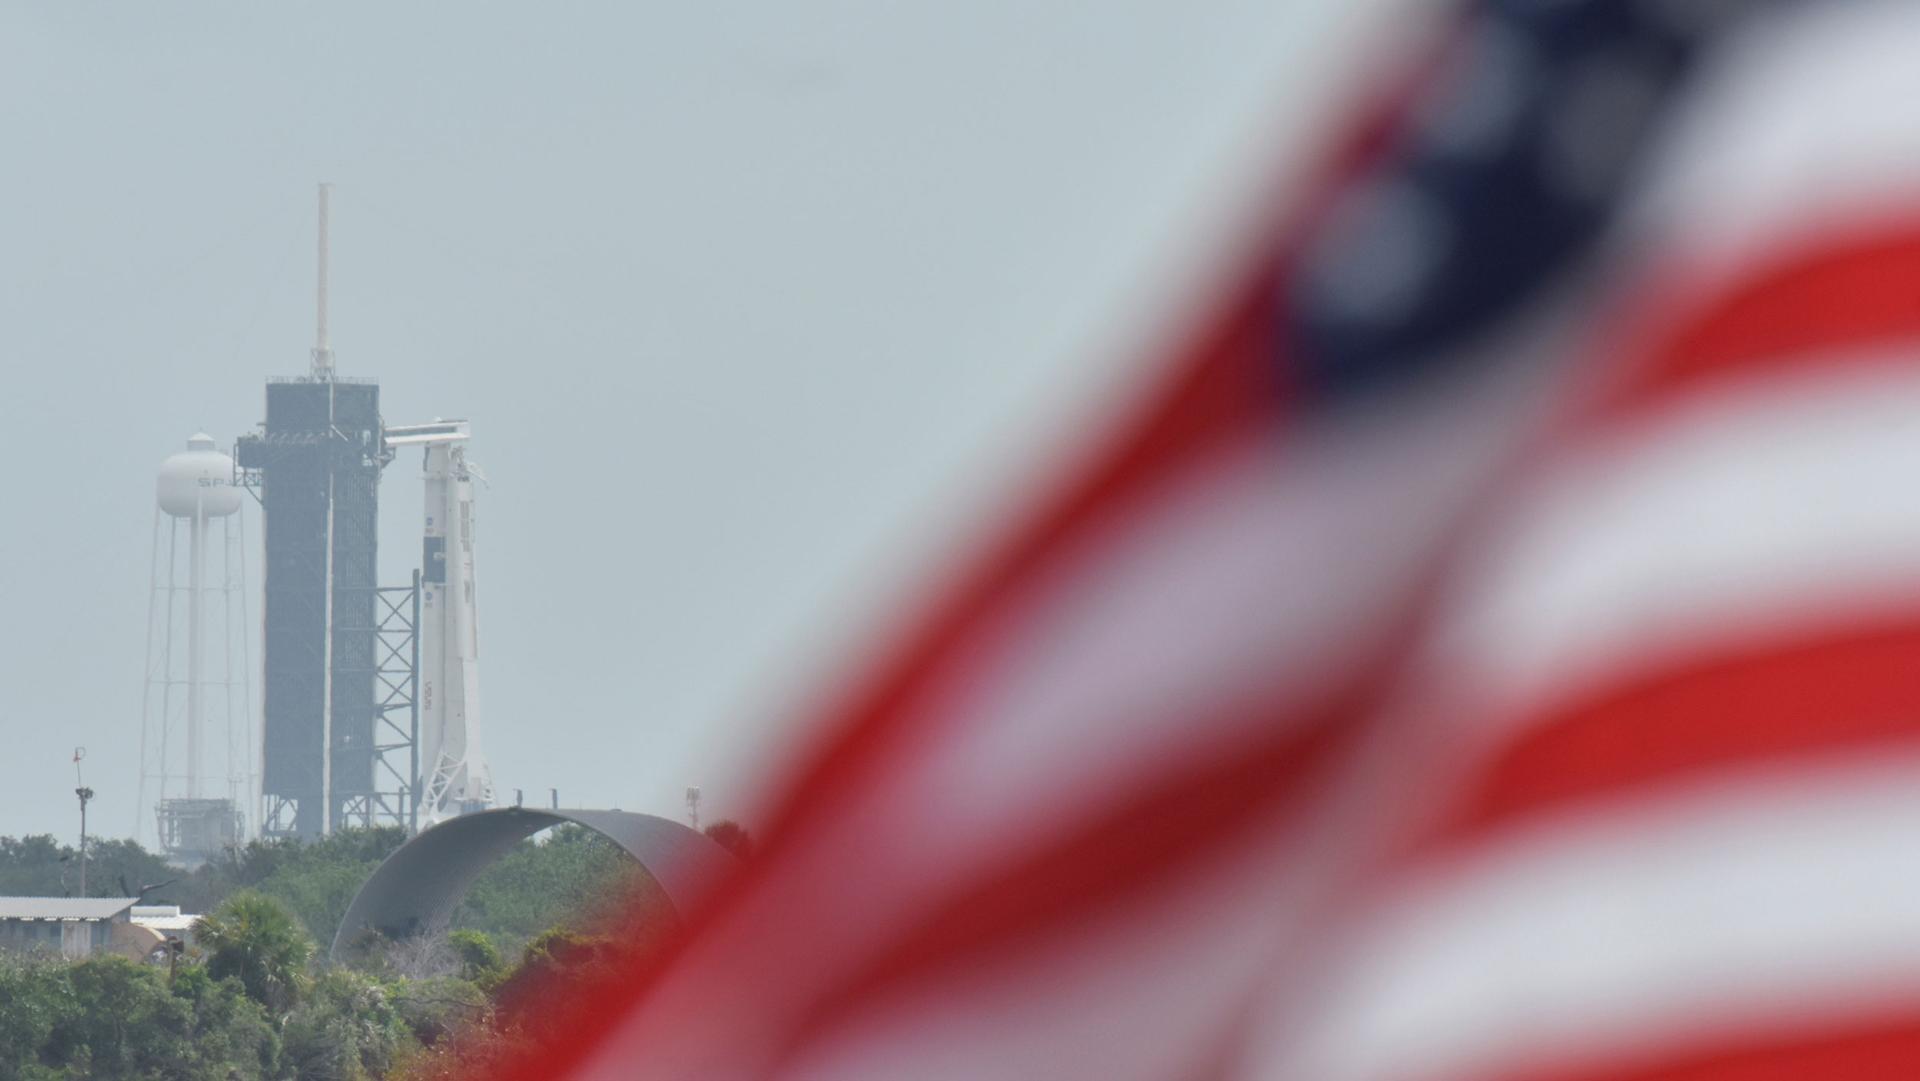 A US flag flutters in the breeze. In the background, a rocket launchpad